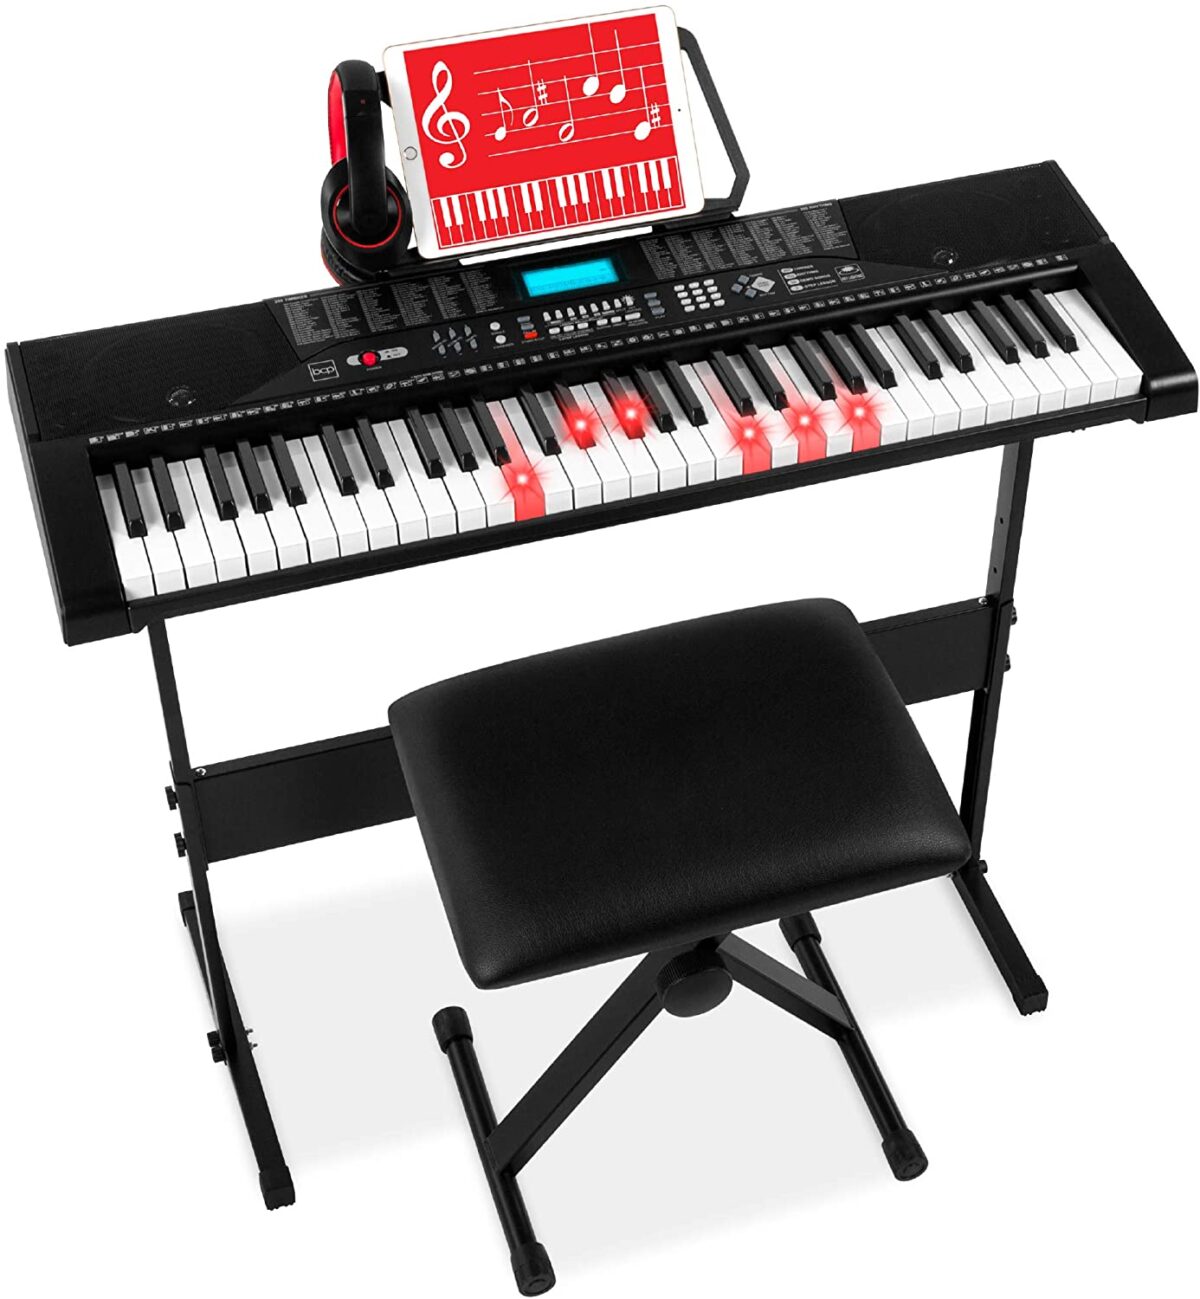 Guide 101: Buying the Best Electric Piano for the Money